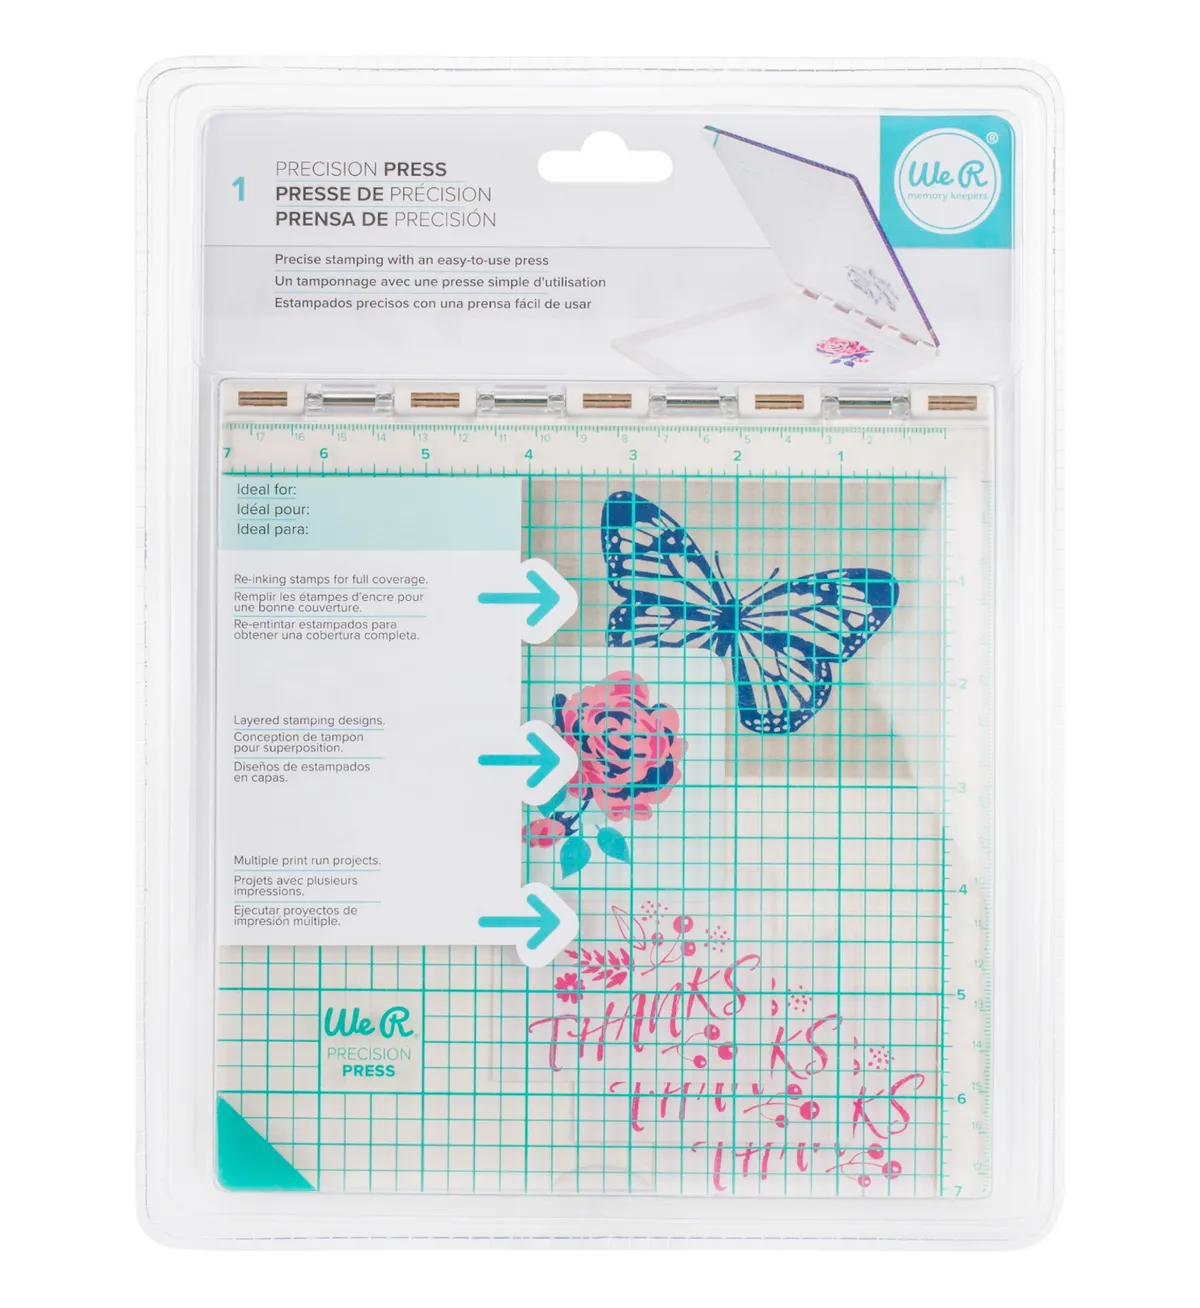 Experts guide to the best stamping platforms - Gathered